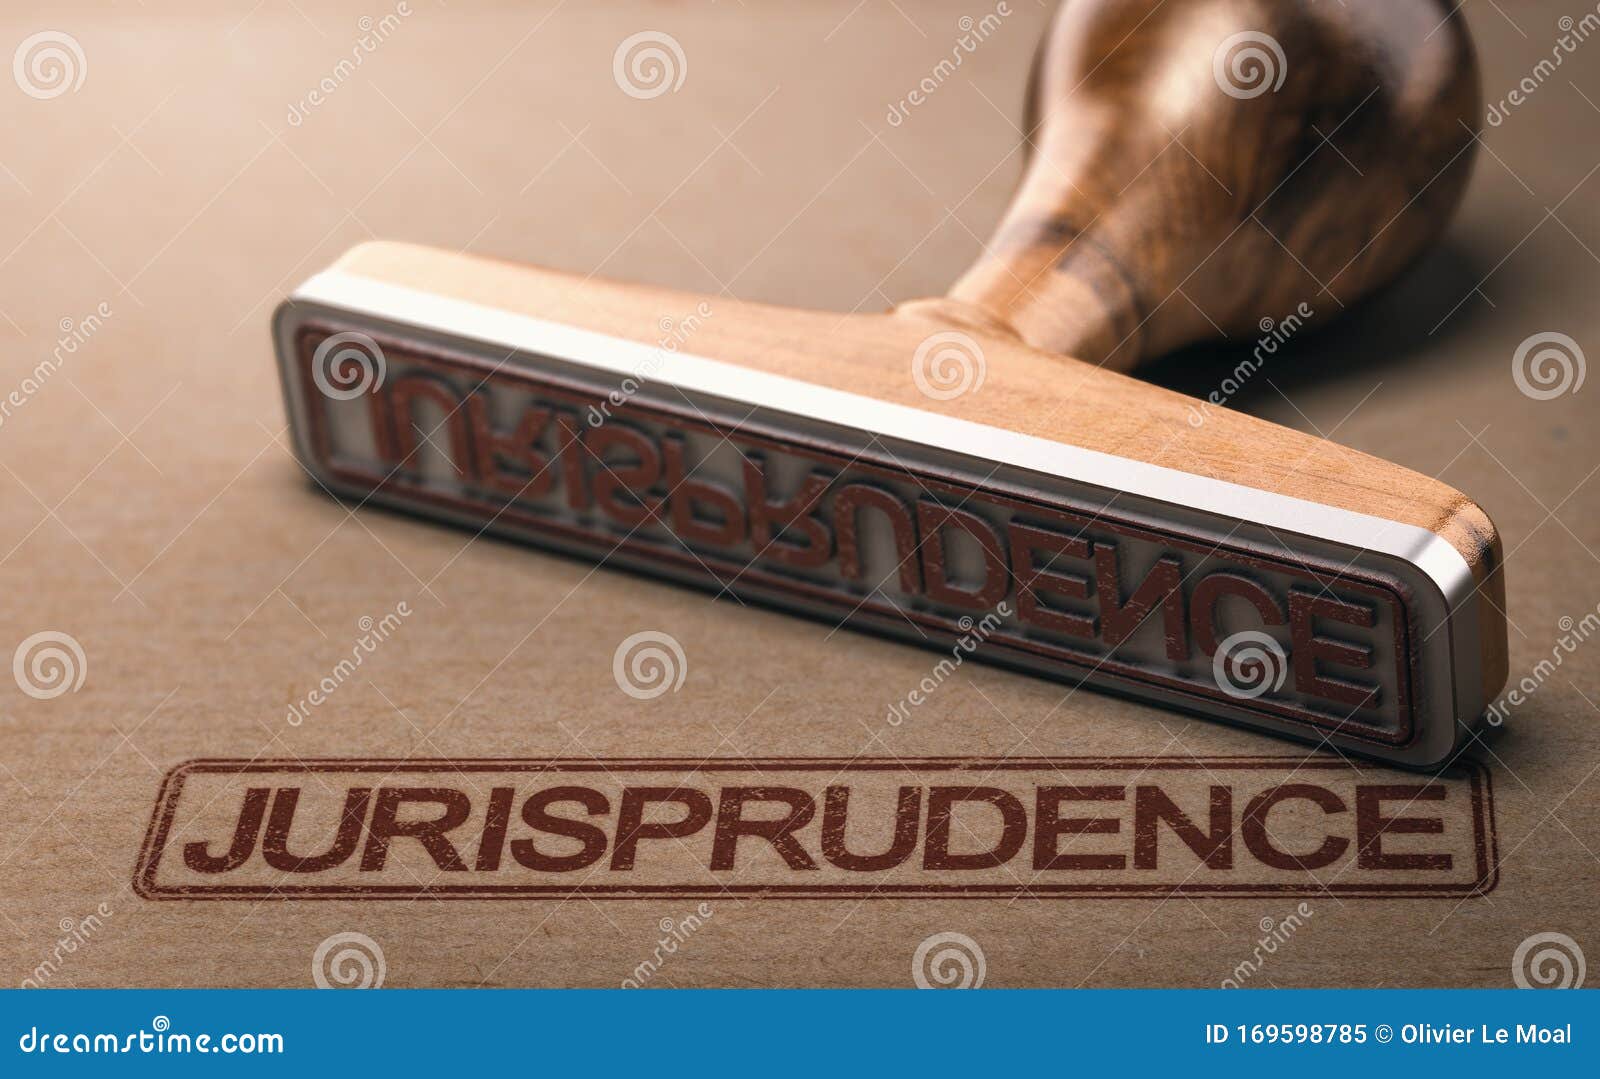 word jurisprudence. law and justice concept